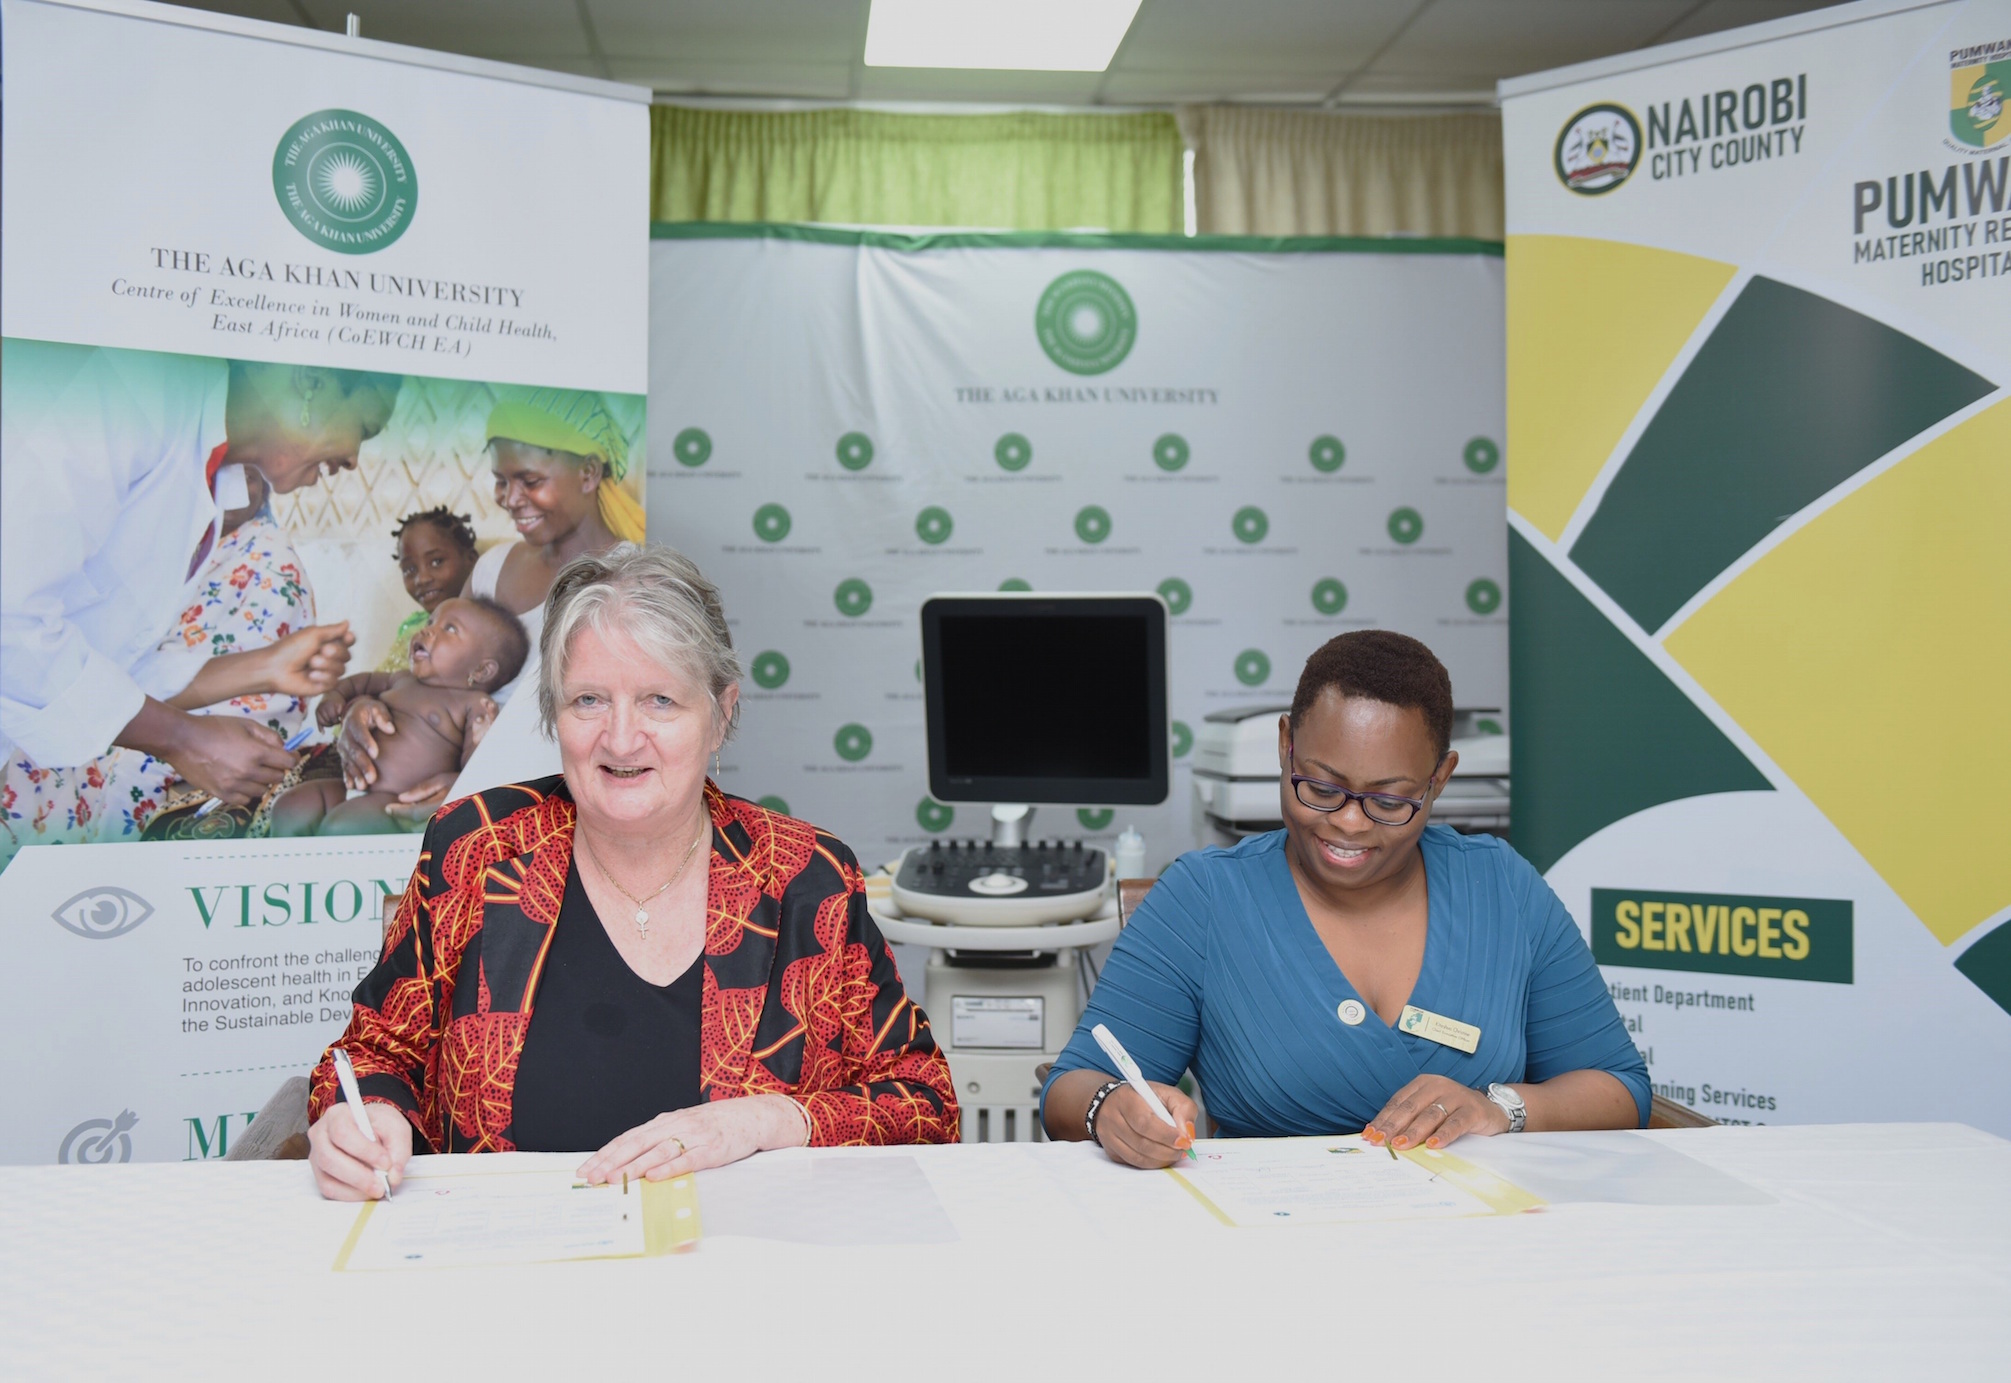 Aga Khan University’s Centre of Excellence in Women and Child Health EA Director Prof Marleen Temmerman & Pumwani Maternity Hospital CEO Christine Kiteshu during the handover ceremony where the university donated equipment worth KES. 2 million to boost the hospital’s maternal and newborn care.